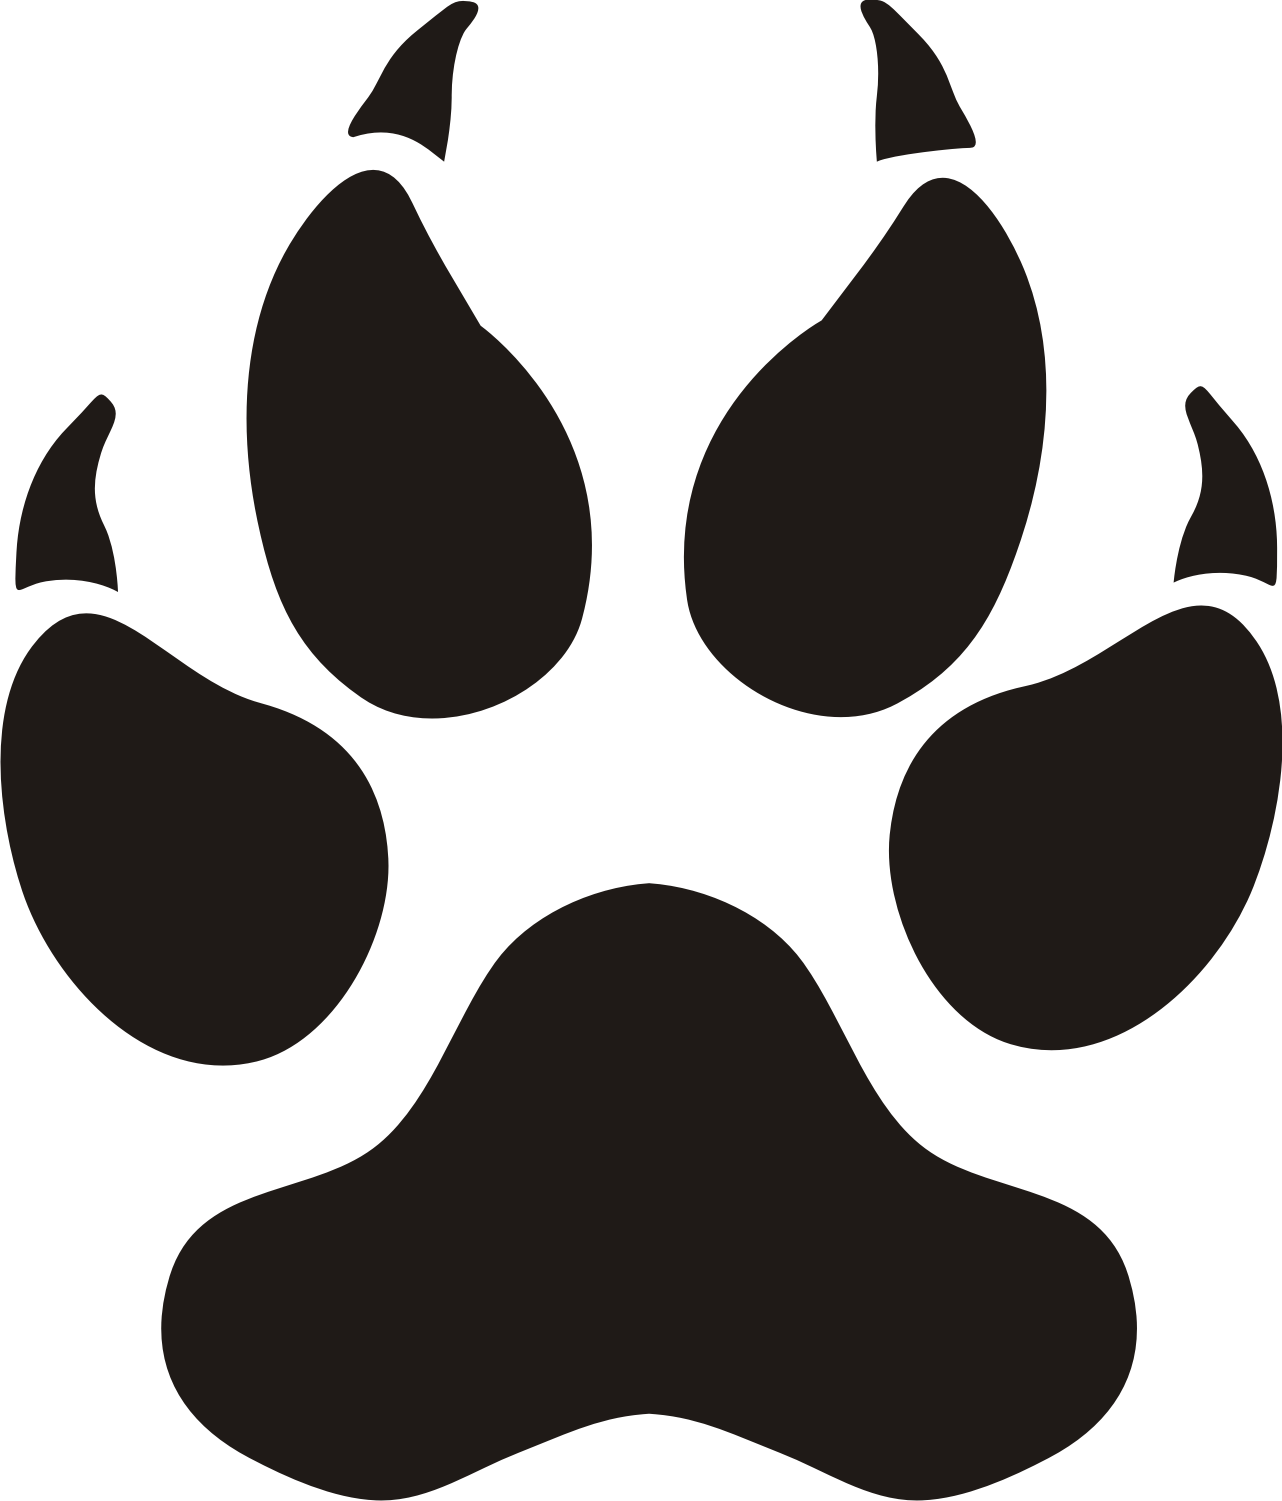 Small Panther Paw Print Images - Clipart library